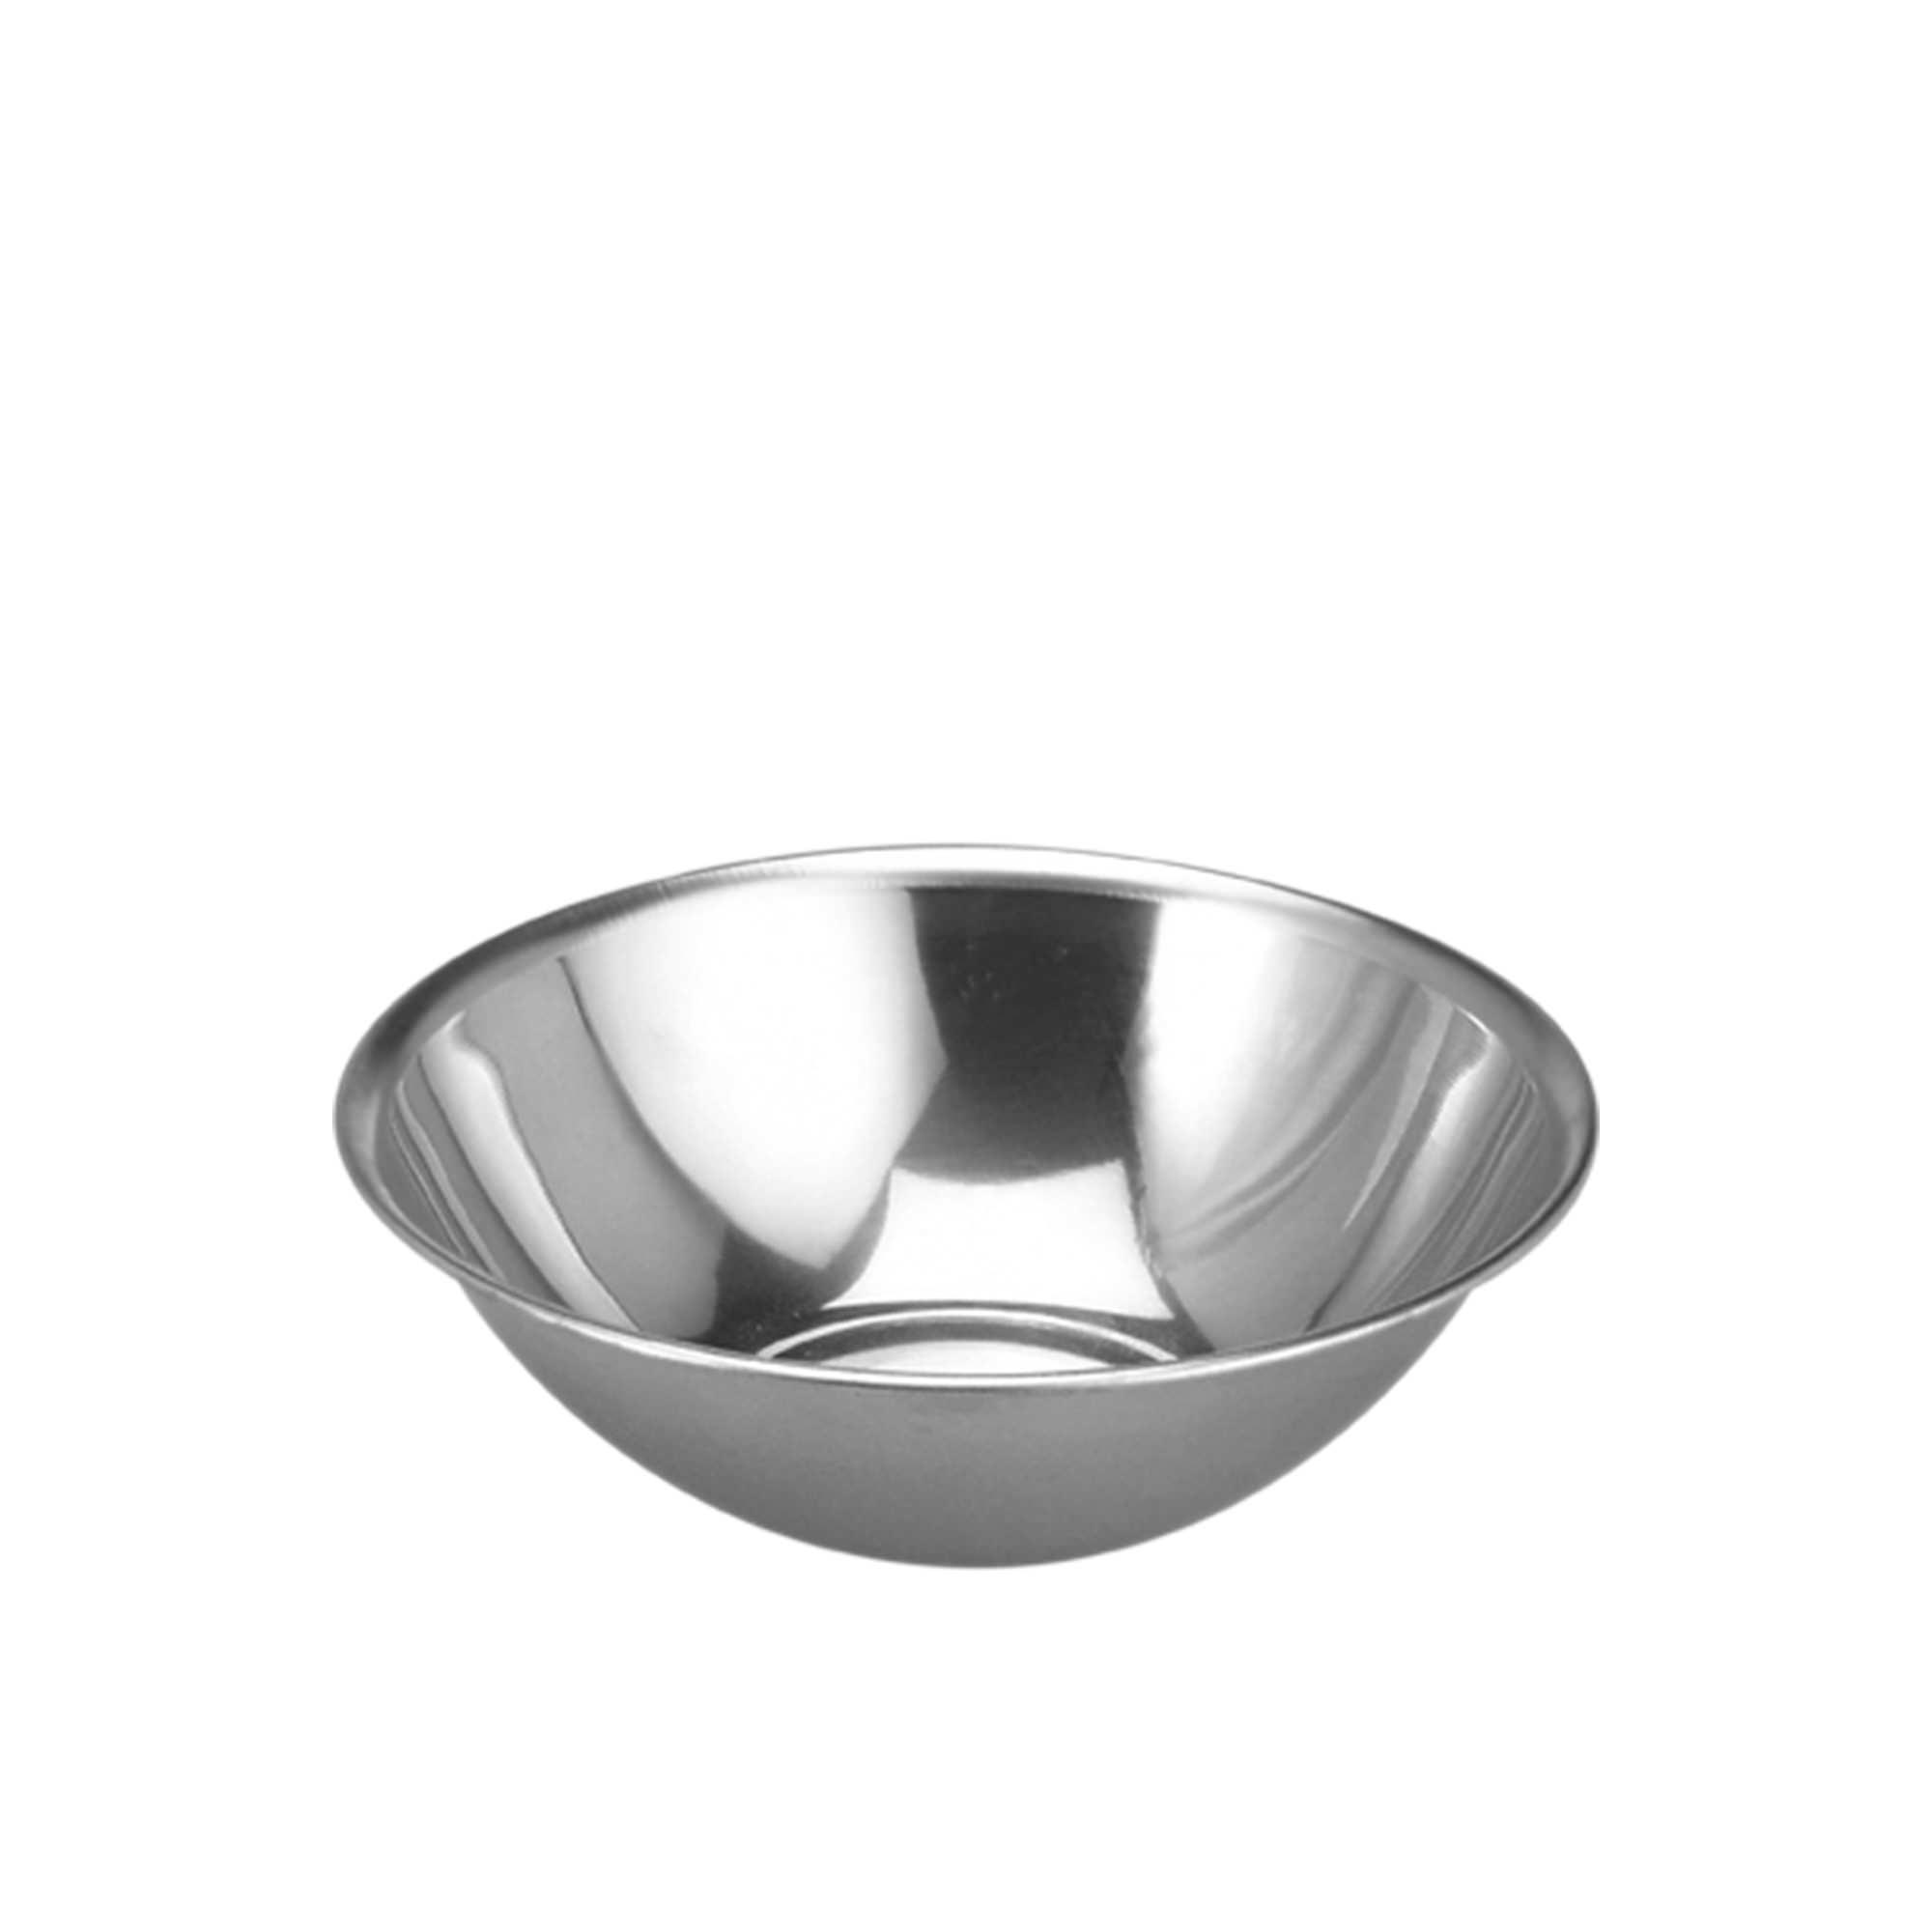 Chef Inox Stainless Steel Mixing Bowl 22.5cm - 2L Image 1